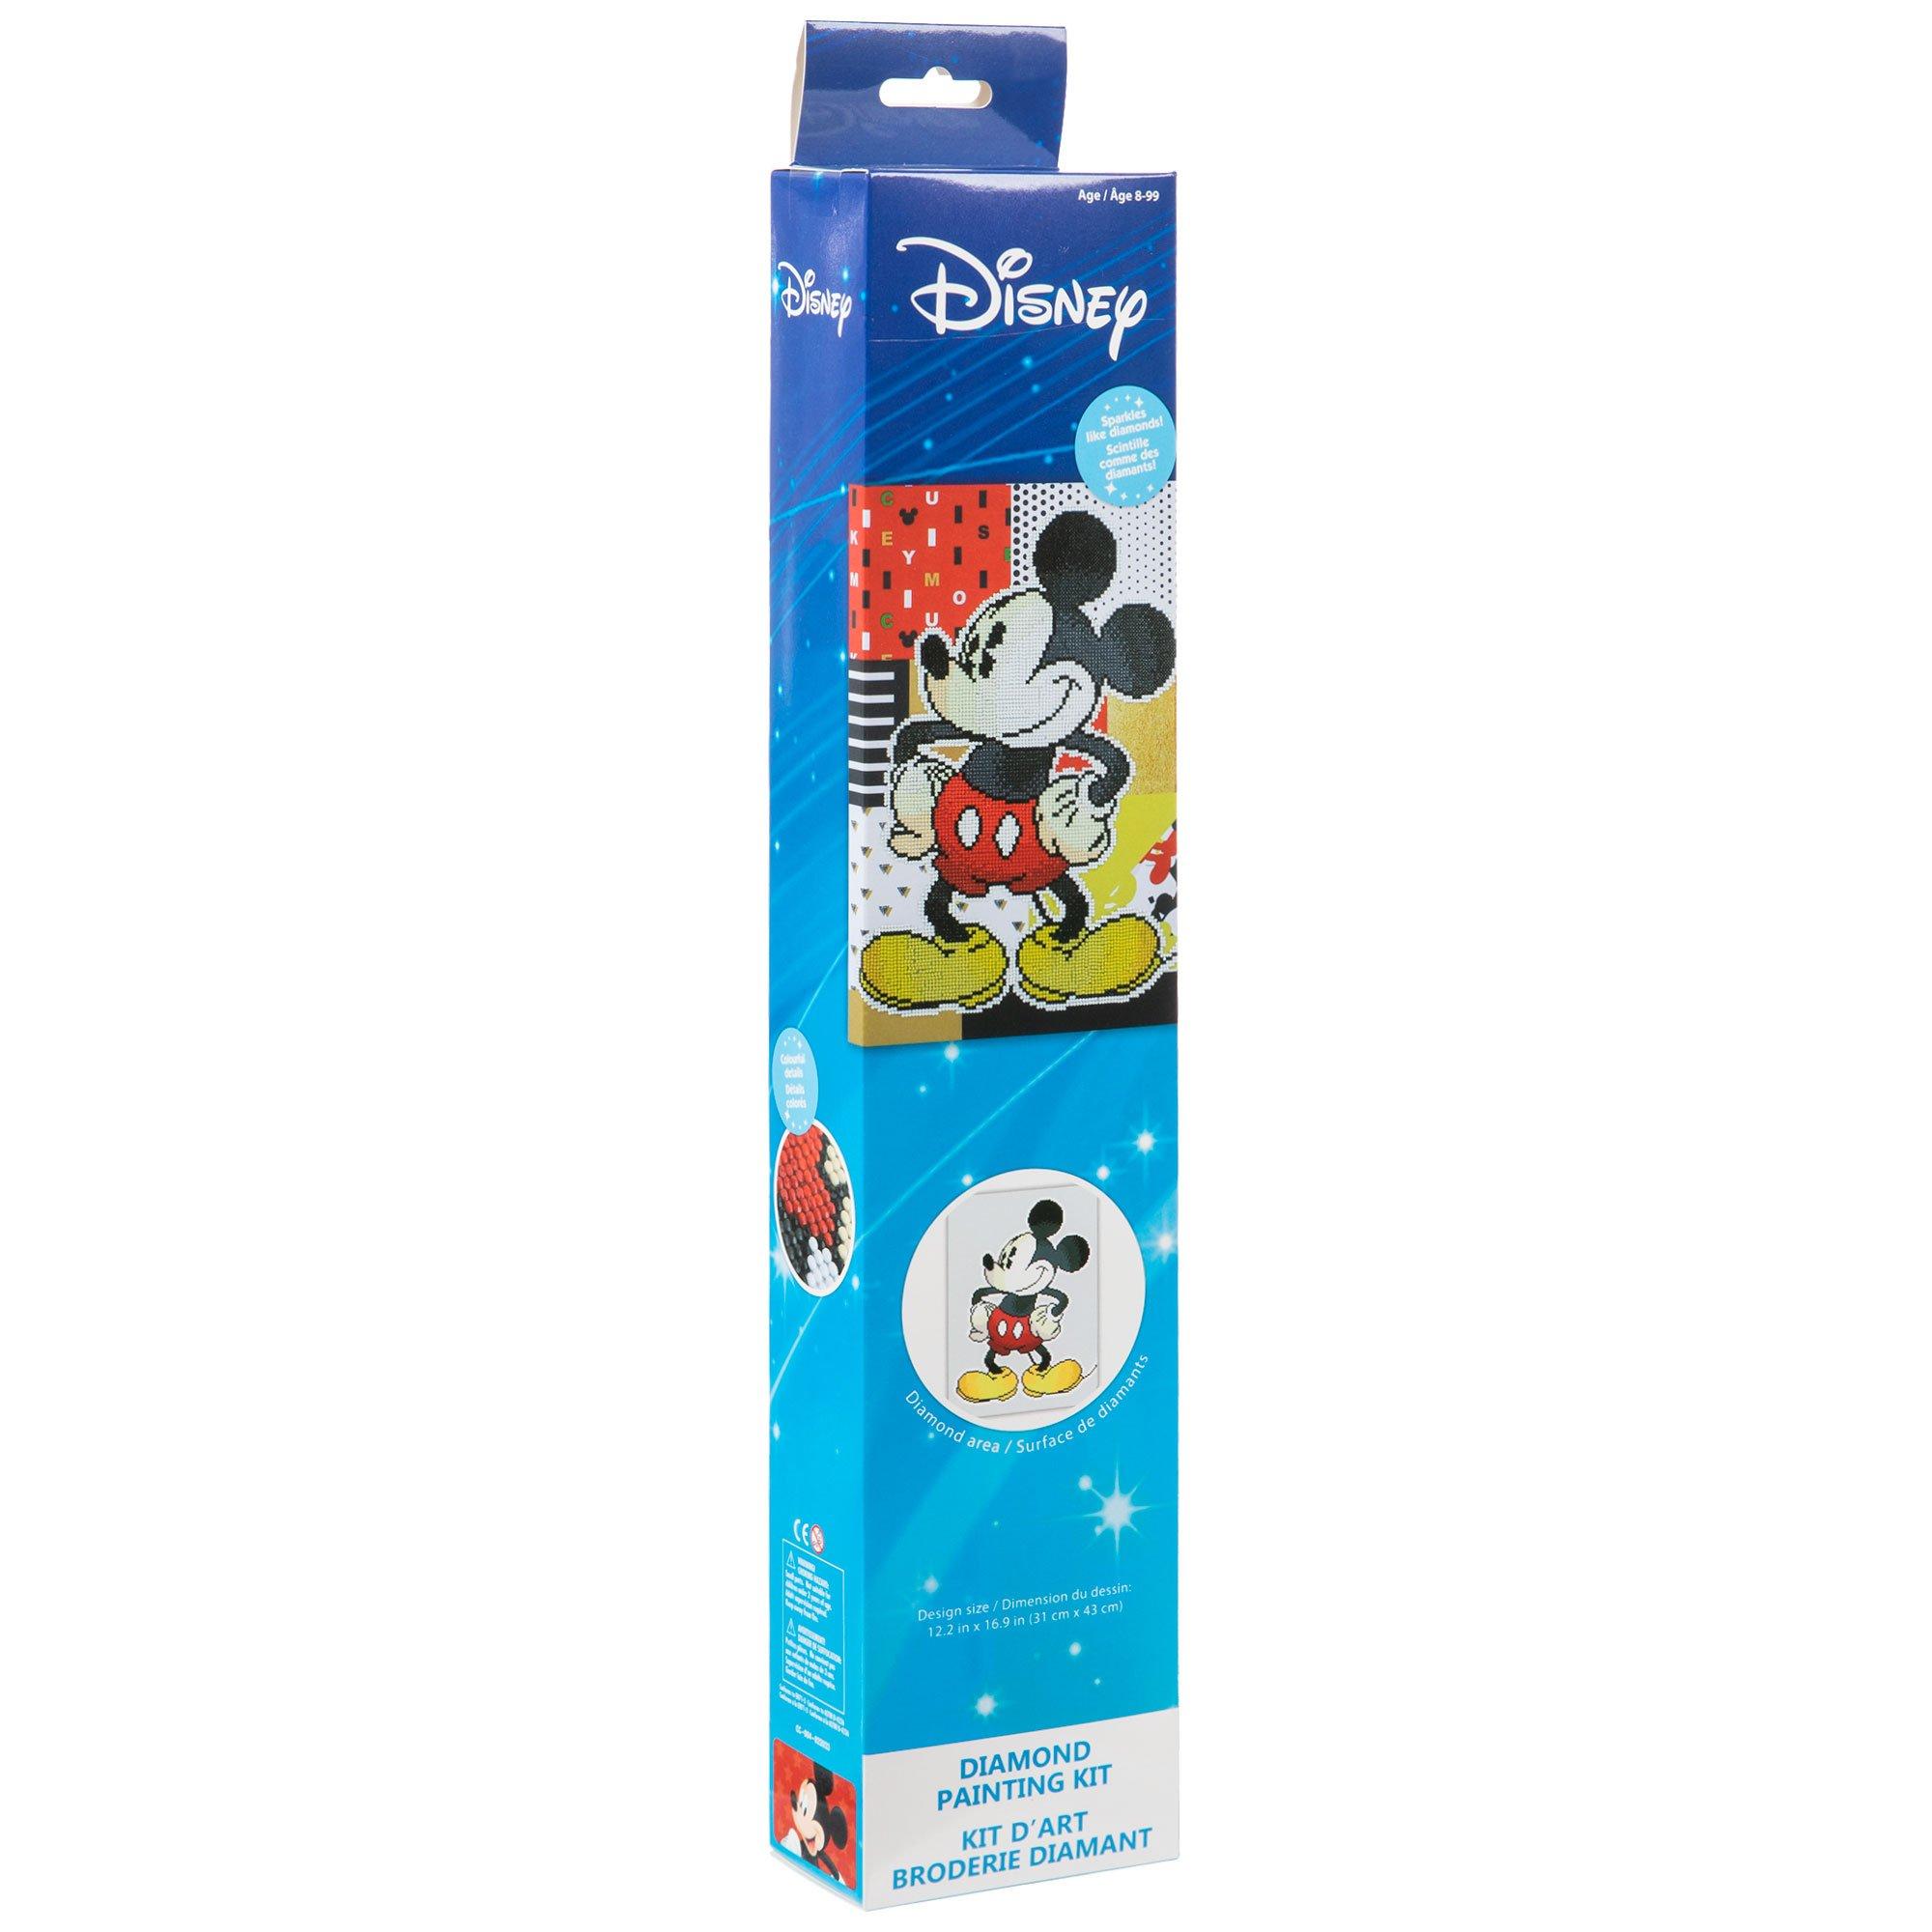 5D Diamond Painting Mickey Mouse Retro and Today Kit